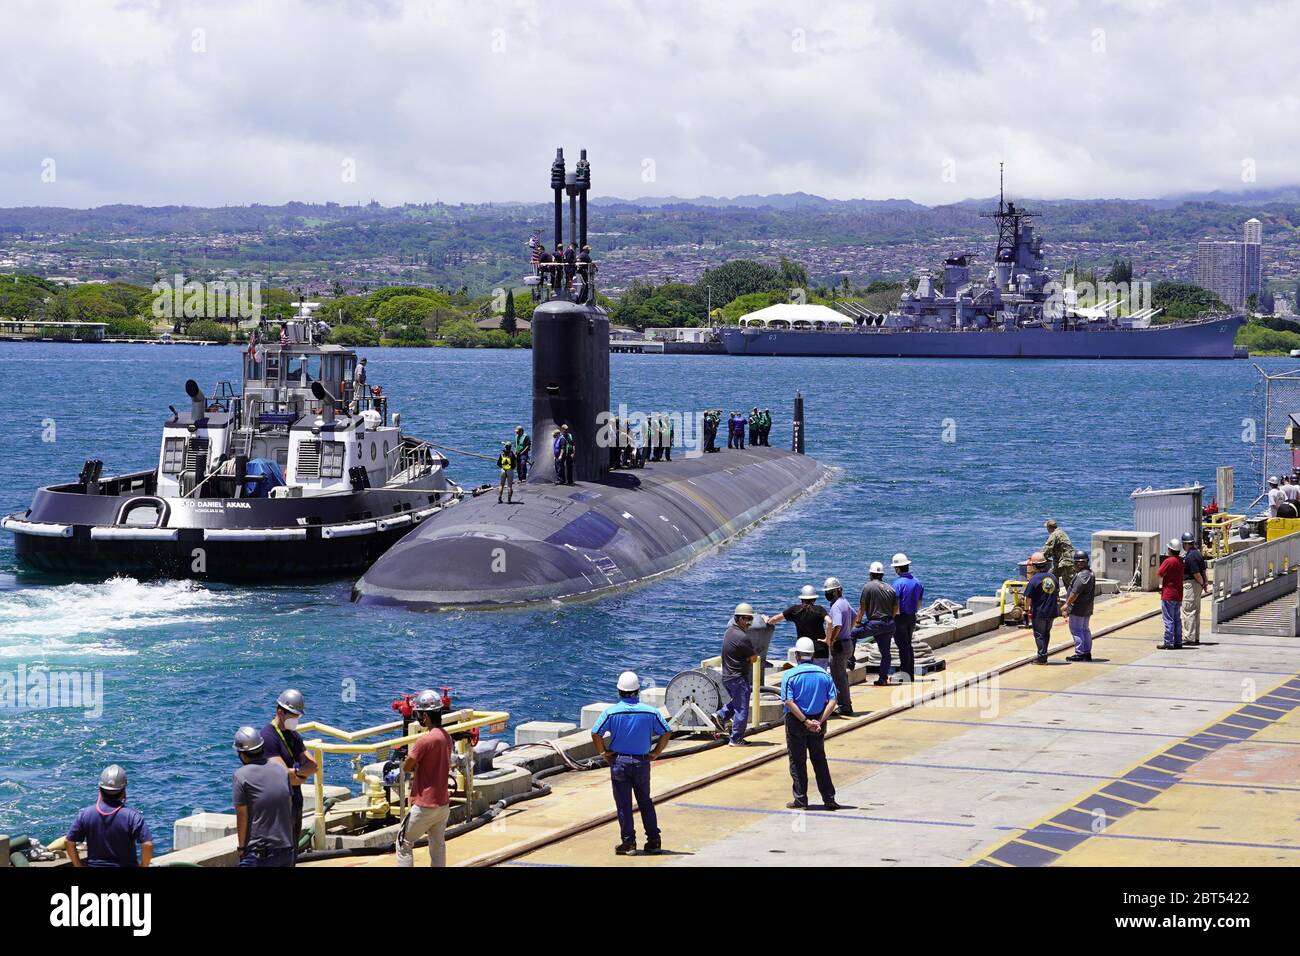 PEARL HARBOR, Hawaii (May 10, 2020) – USS Missouri (SSN 780), a Virginia-class fast-attack submarine, departs Pearl Harbor Naval Shipyard and Intermediate Maintenance Facility piers to begin sea trials on May 10. Missouri's routine maintenance and modernization work was completed five days ahead of schedule after successful sea trials and certification. The submarine's recent availability required 2.2 million work-hours to complete more than 20,000 jobs that will ensure the ship remains fully operational for its planned 33-year service life. Stock Photo